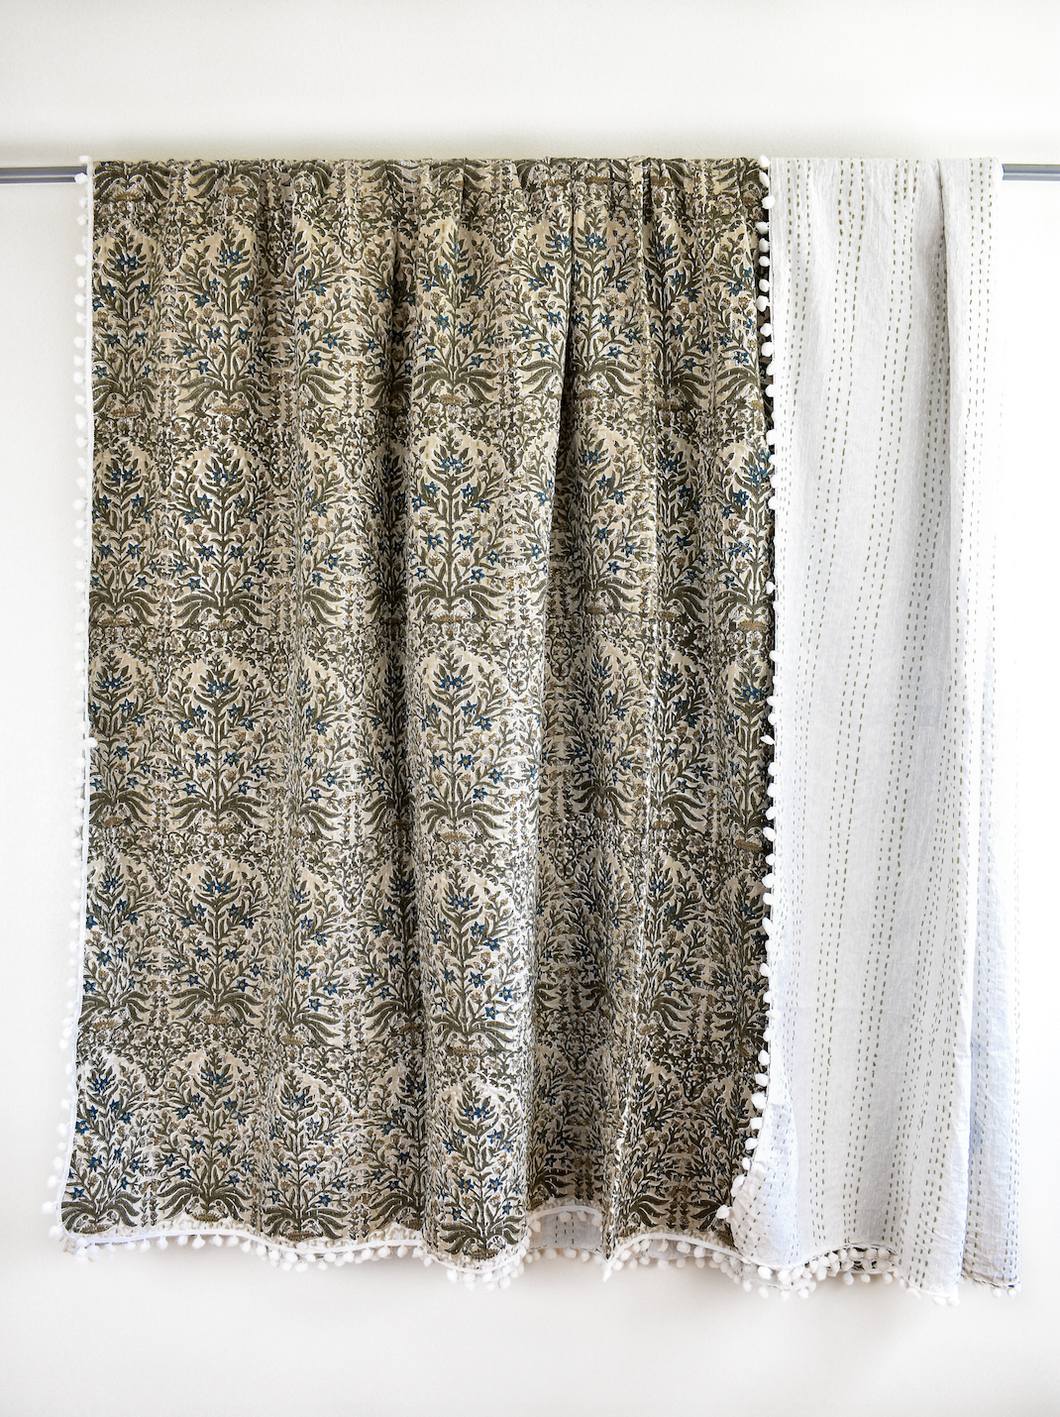 *Pre-Order* Lucy Pom Pom Kantha Quilt in Beige, Olive, Ochre and Indigo - King/Queen Sized